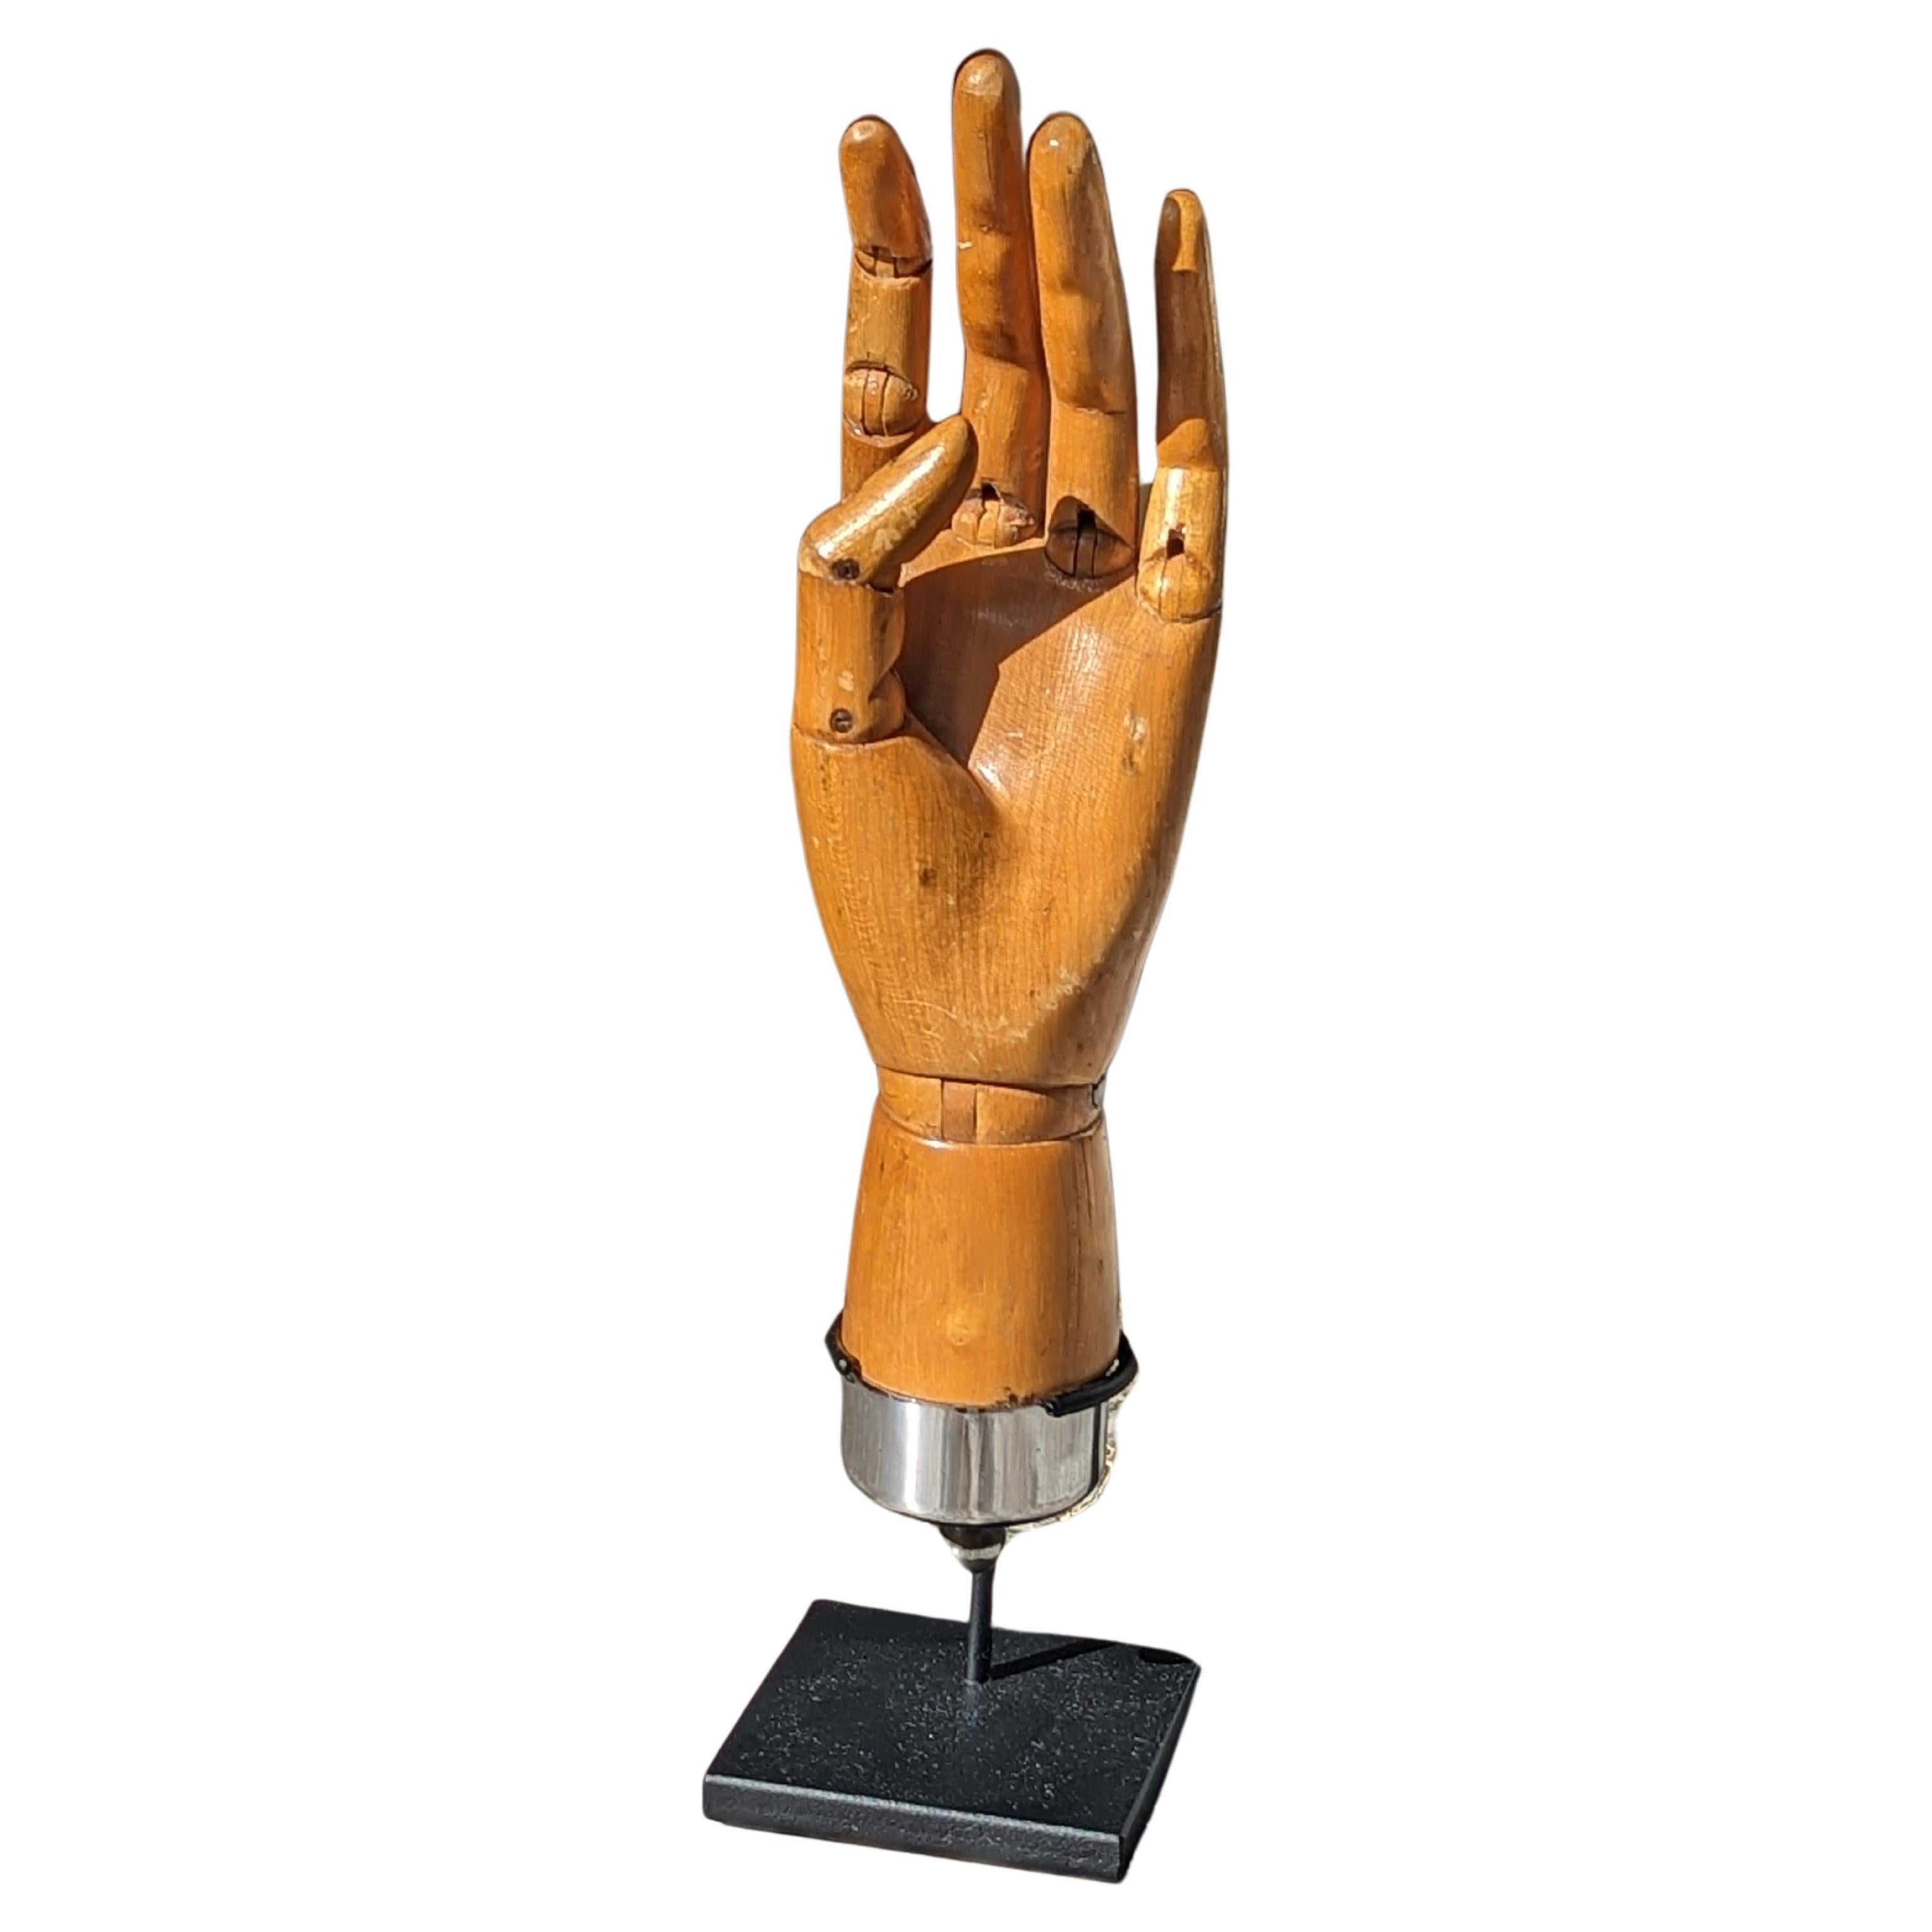 C.1900 Articulated Wooden Hands - Artist's Model or Display For Sale